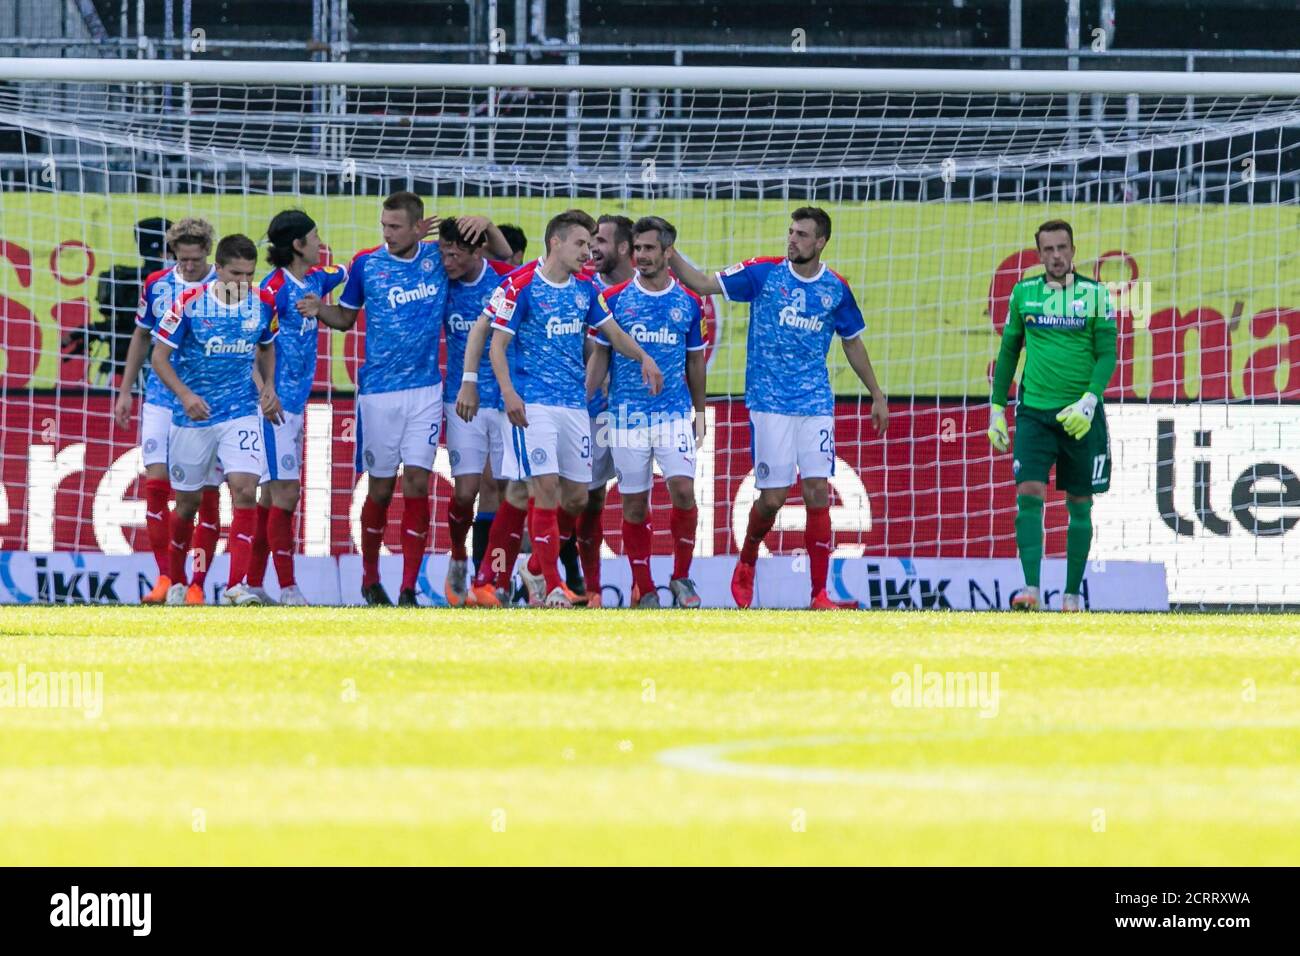 Kiel, Germany. 20th Sep, 2020. Soccer: 2nd Bundesliga, Holstein Kiel - SC Paderborn 07, 1st matchday: The players of Holstein Kiel cheer after the goal for 1-0. Paderborn goalkeeper Leopold Zingerle (r) reacts disappointed. Credit: Frank Molter/dpa - IMPORTANT NOTE: In accordance with the regulations of the DFL Deutsche Fußball Liga and the DFB Deutscher Fußball-Bund, it is prohibited to exploit or have exploited in the stadium and/or from the game taken photographs in the form of sequence images and/or video-like photo series./dpa/Alamy Live News Stock Photo